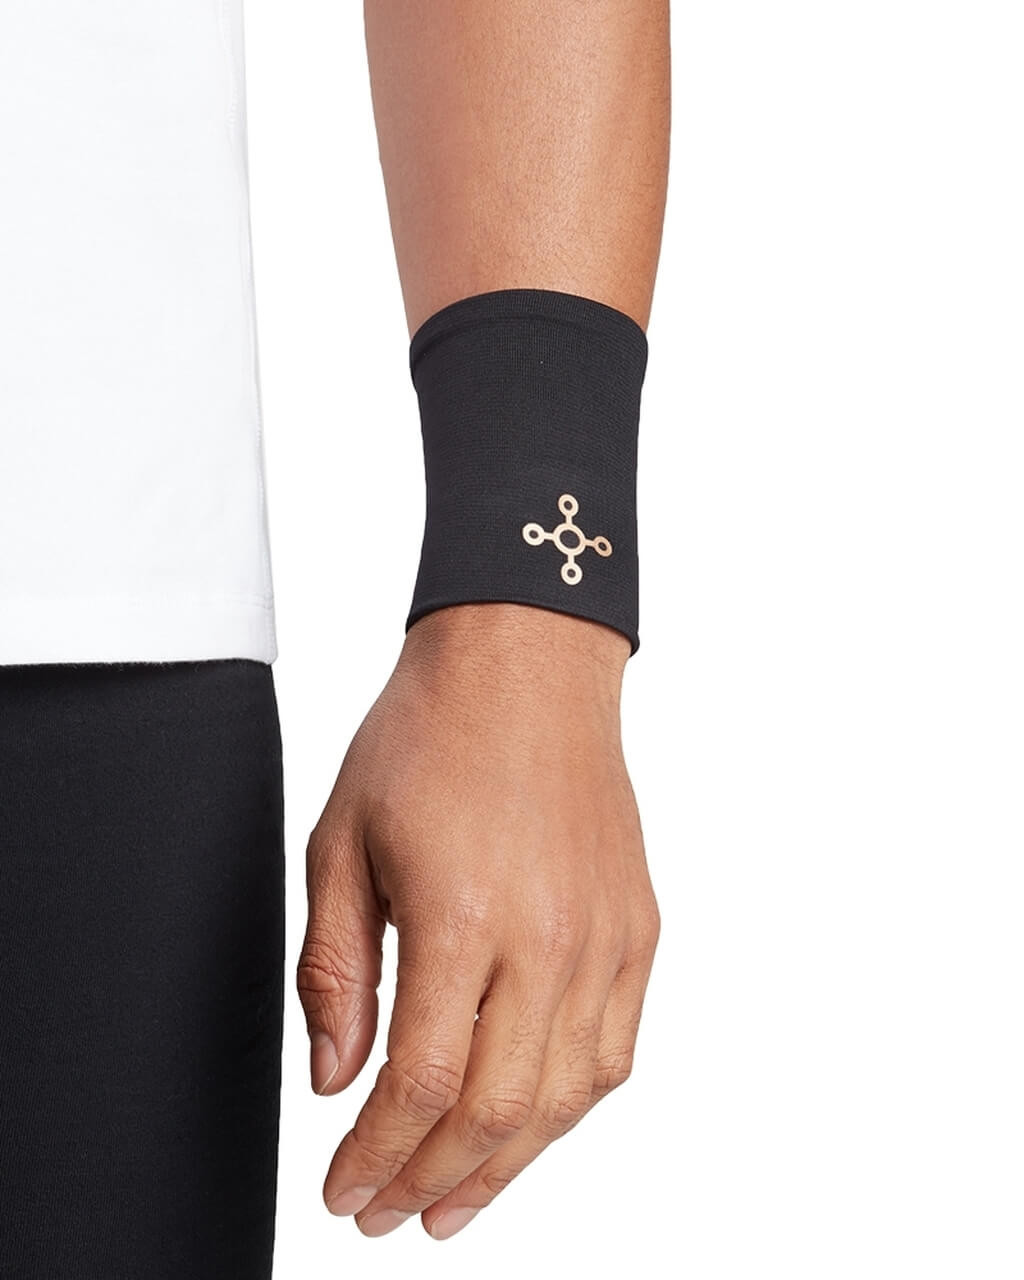 Tommie Copper Compression Wrist Sleeve - Black